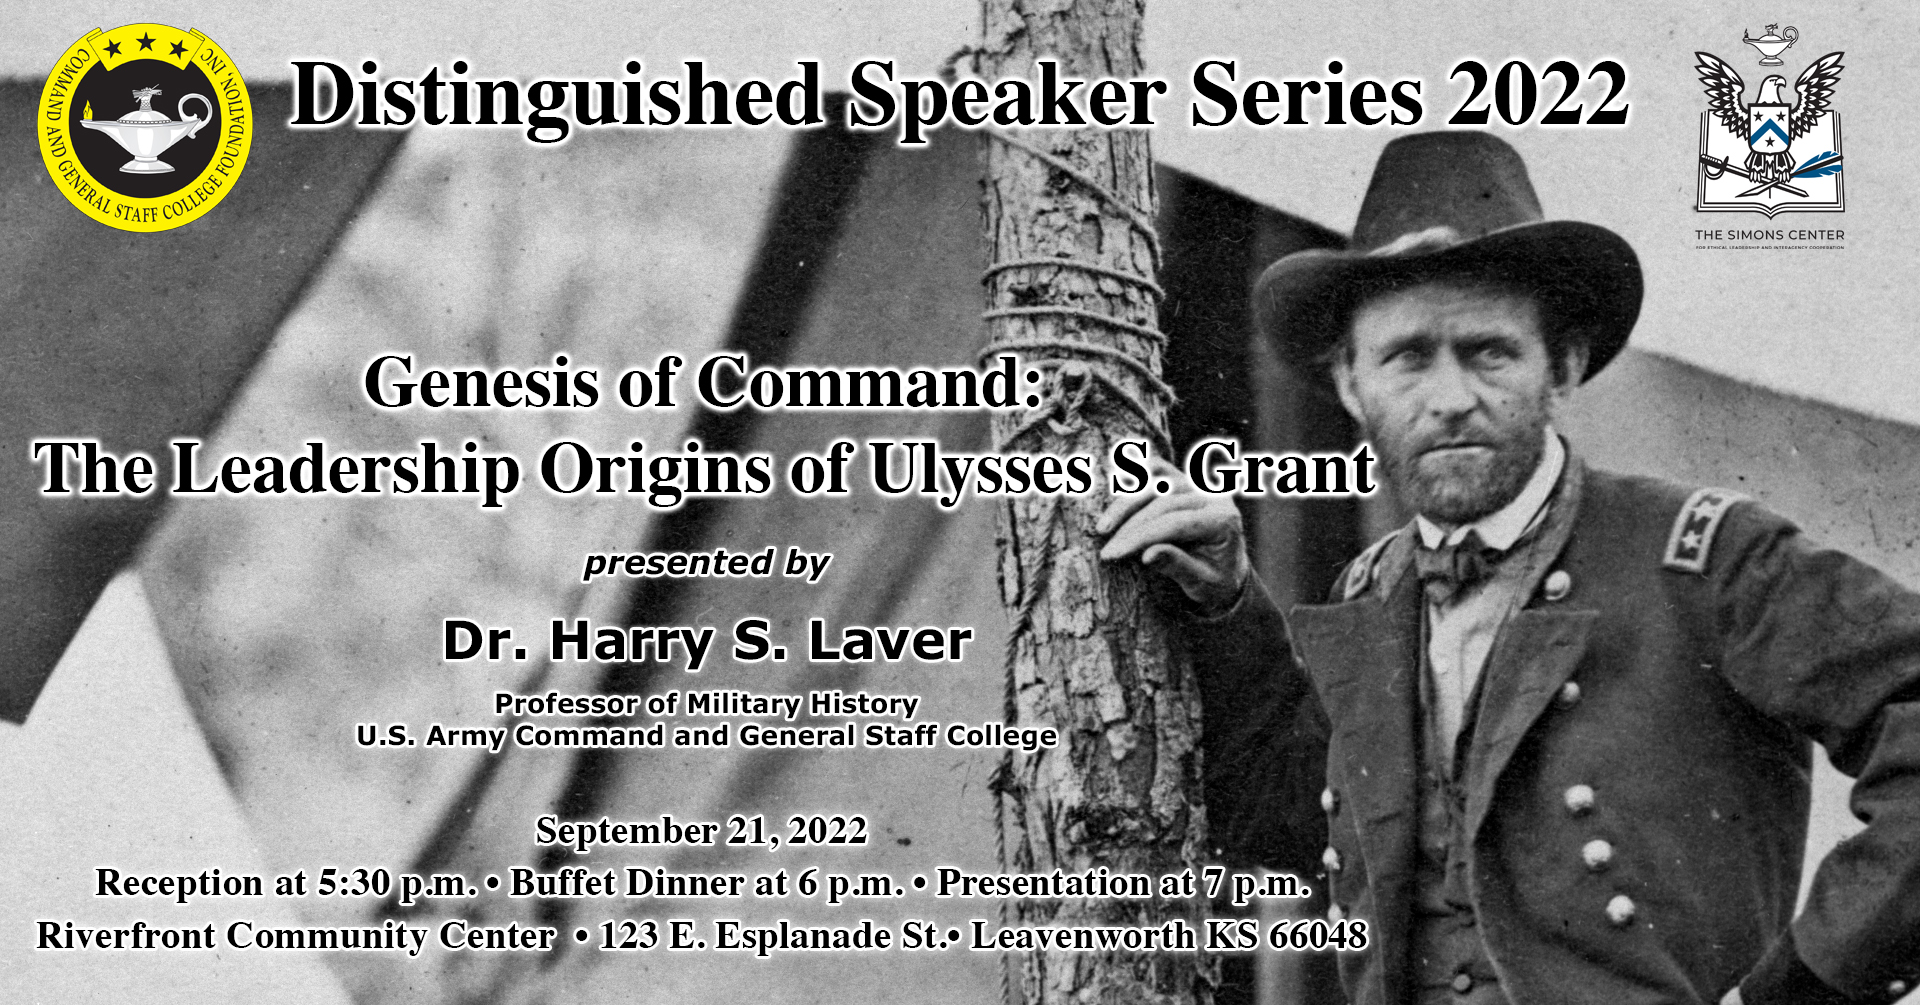 Composite image with a historical photo of Gen. Ulysses S. Grant leaning against a tree at his field headquarters in Cold Harbor, Virginia, on June 11 or 12, 1864, during the Civil War. Over the photo is information inviting the public to attend Dr. Harry Laver's lecture on Grant at the Riverfront Community Center in downtown Leavenworth, Kansas (123 E. Esplanade St.). A reception begins at 5:30 p.m., the buffet dinner starts at 6 p.m. and the presentation will begin at 7 p.m.